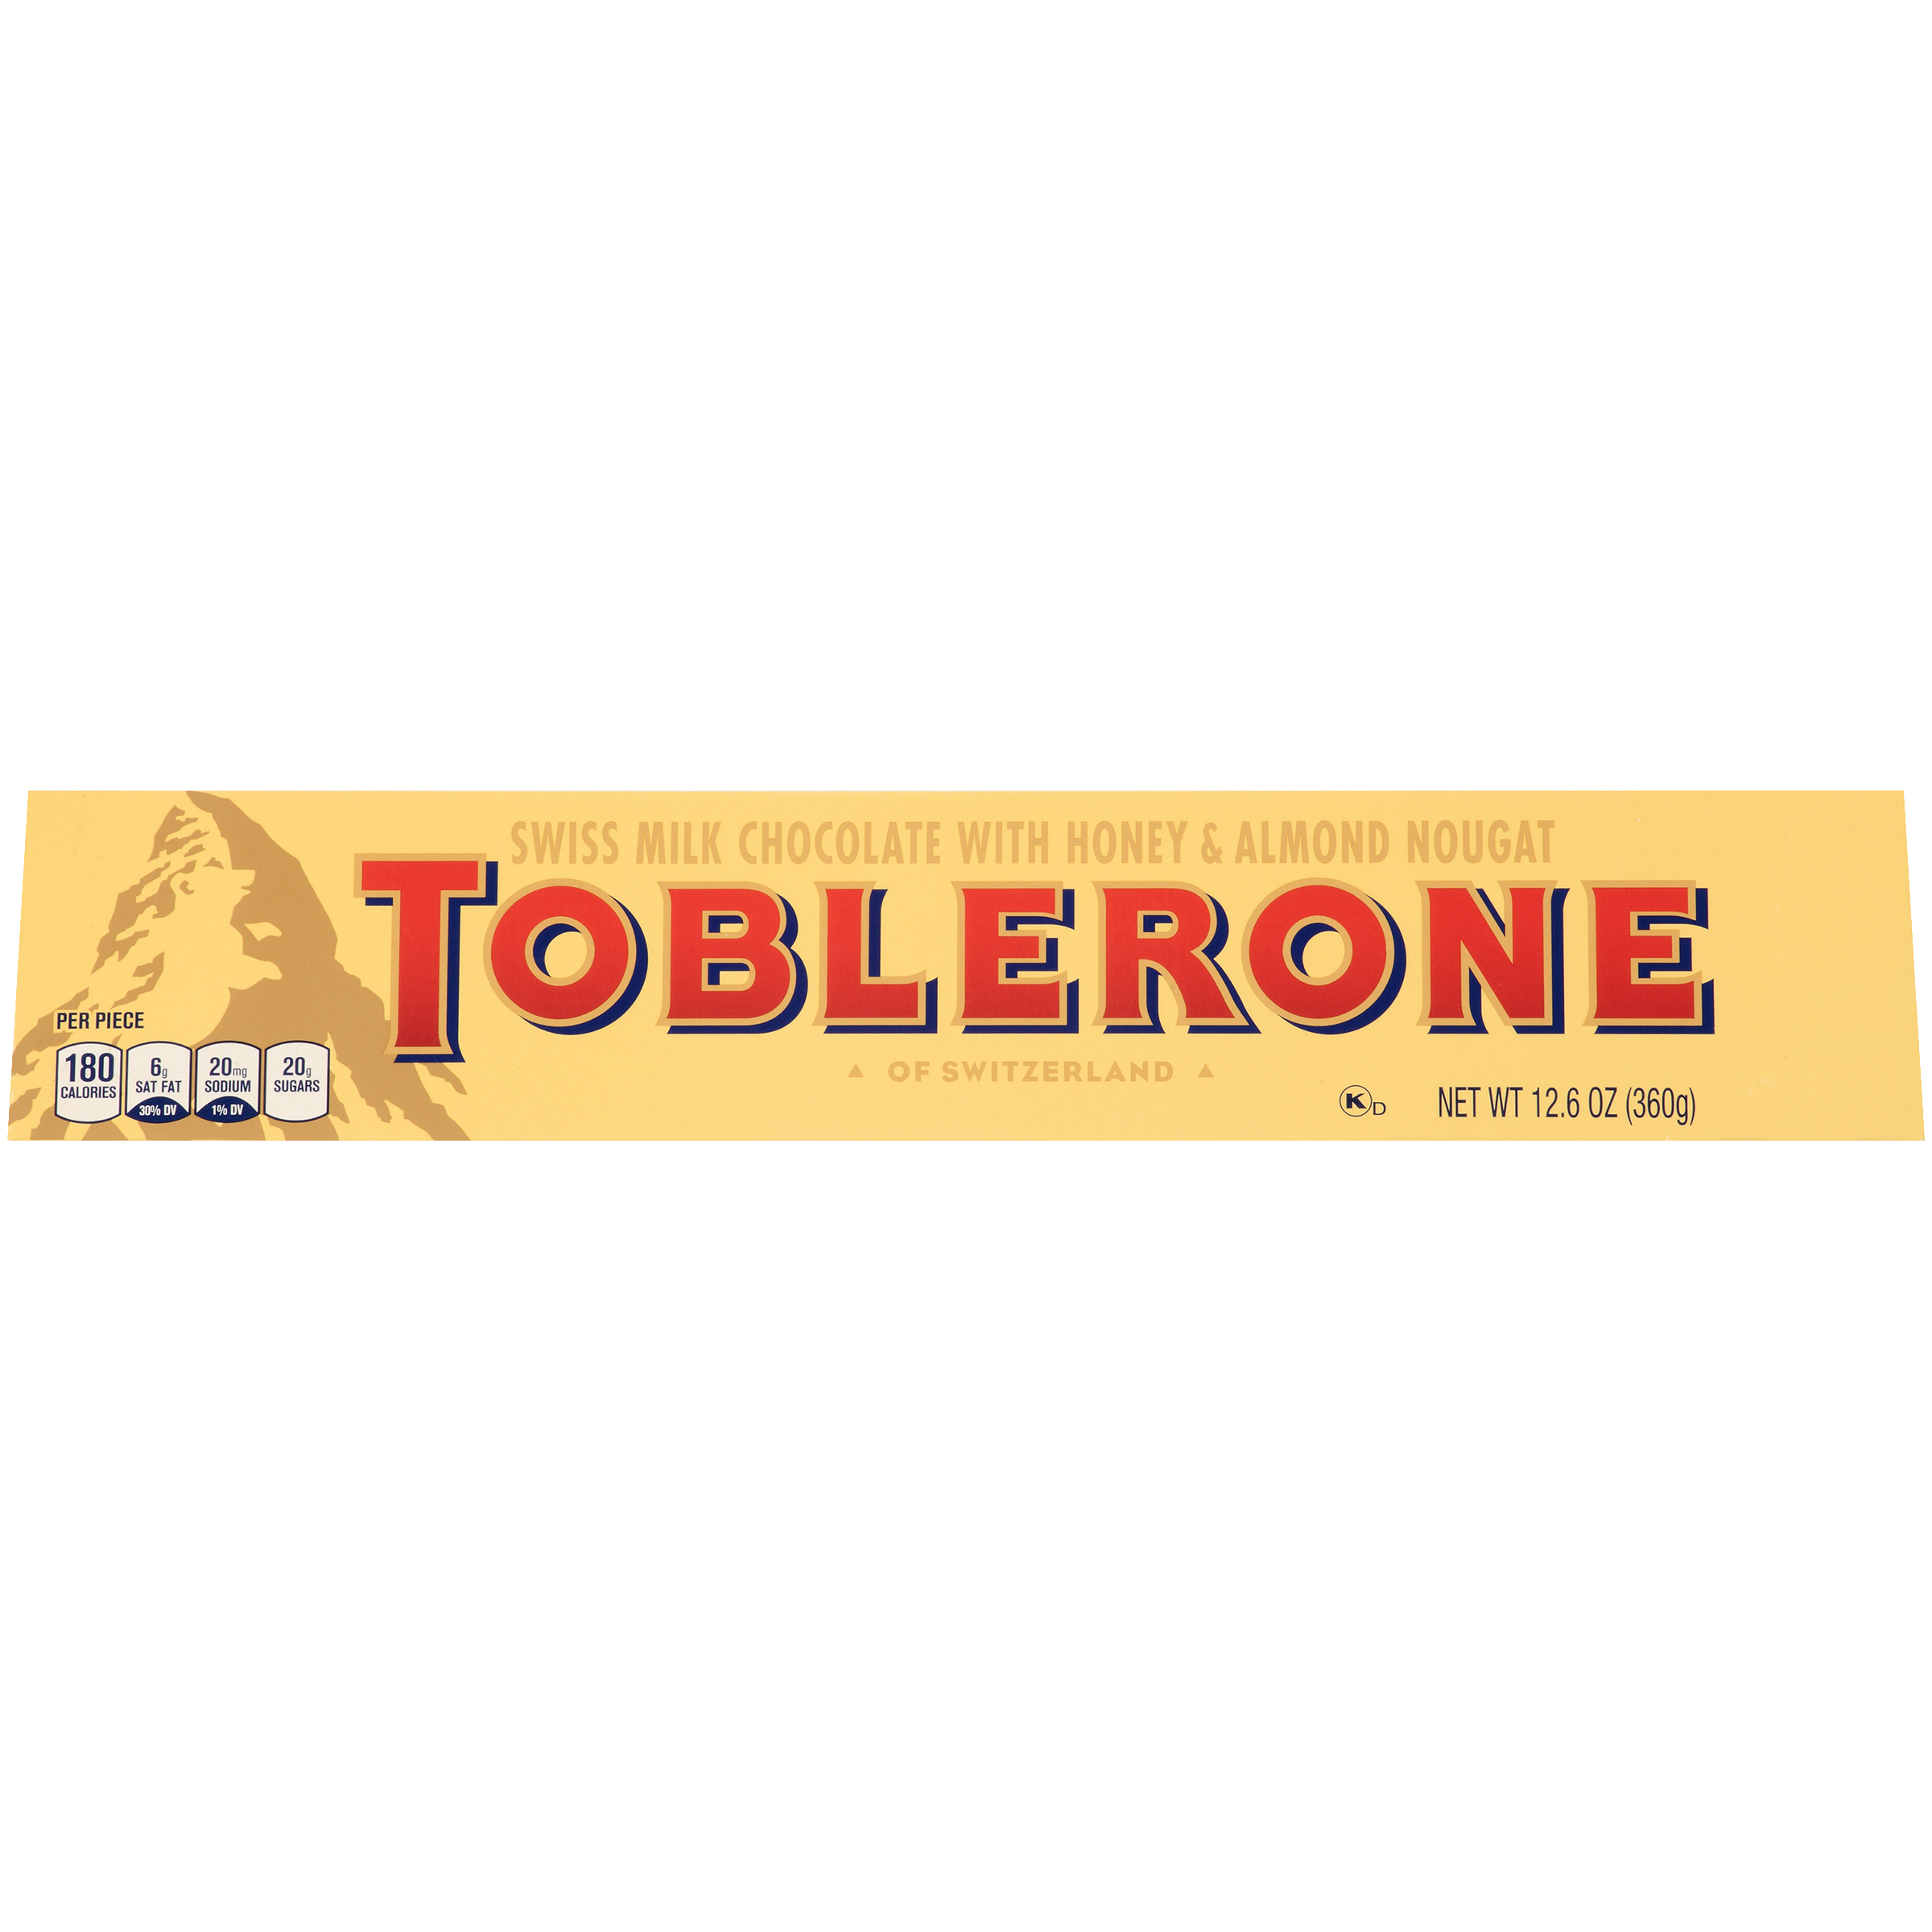 Toblerone Swiss Milk Chocolate Candy Bar with Honey and Almond Nougat, 12.6 oz-0